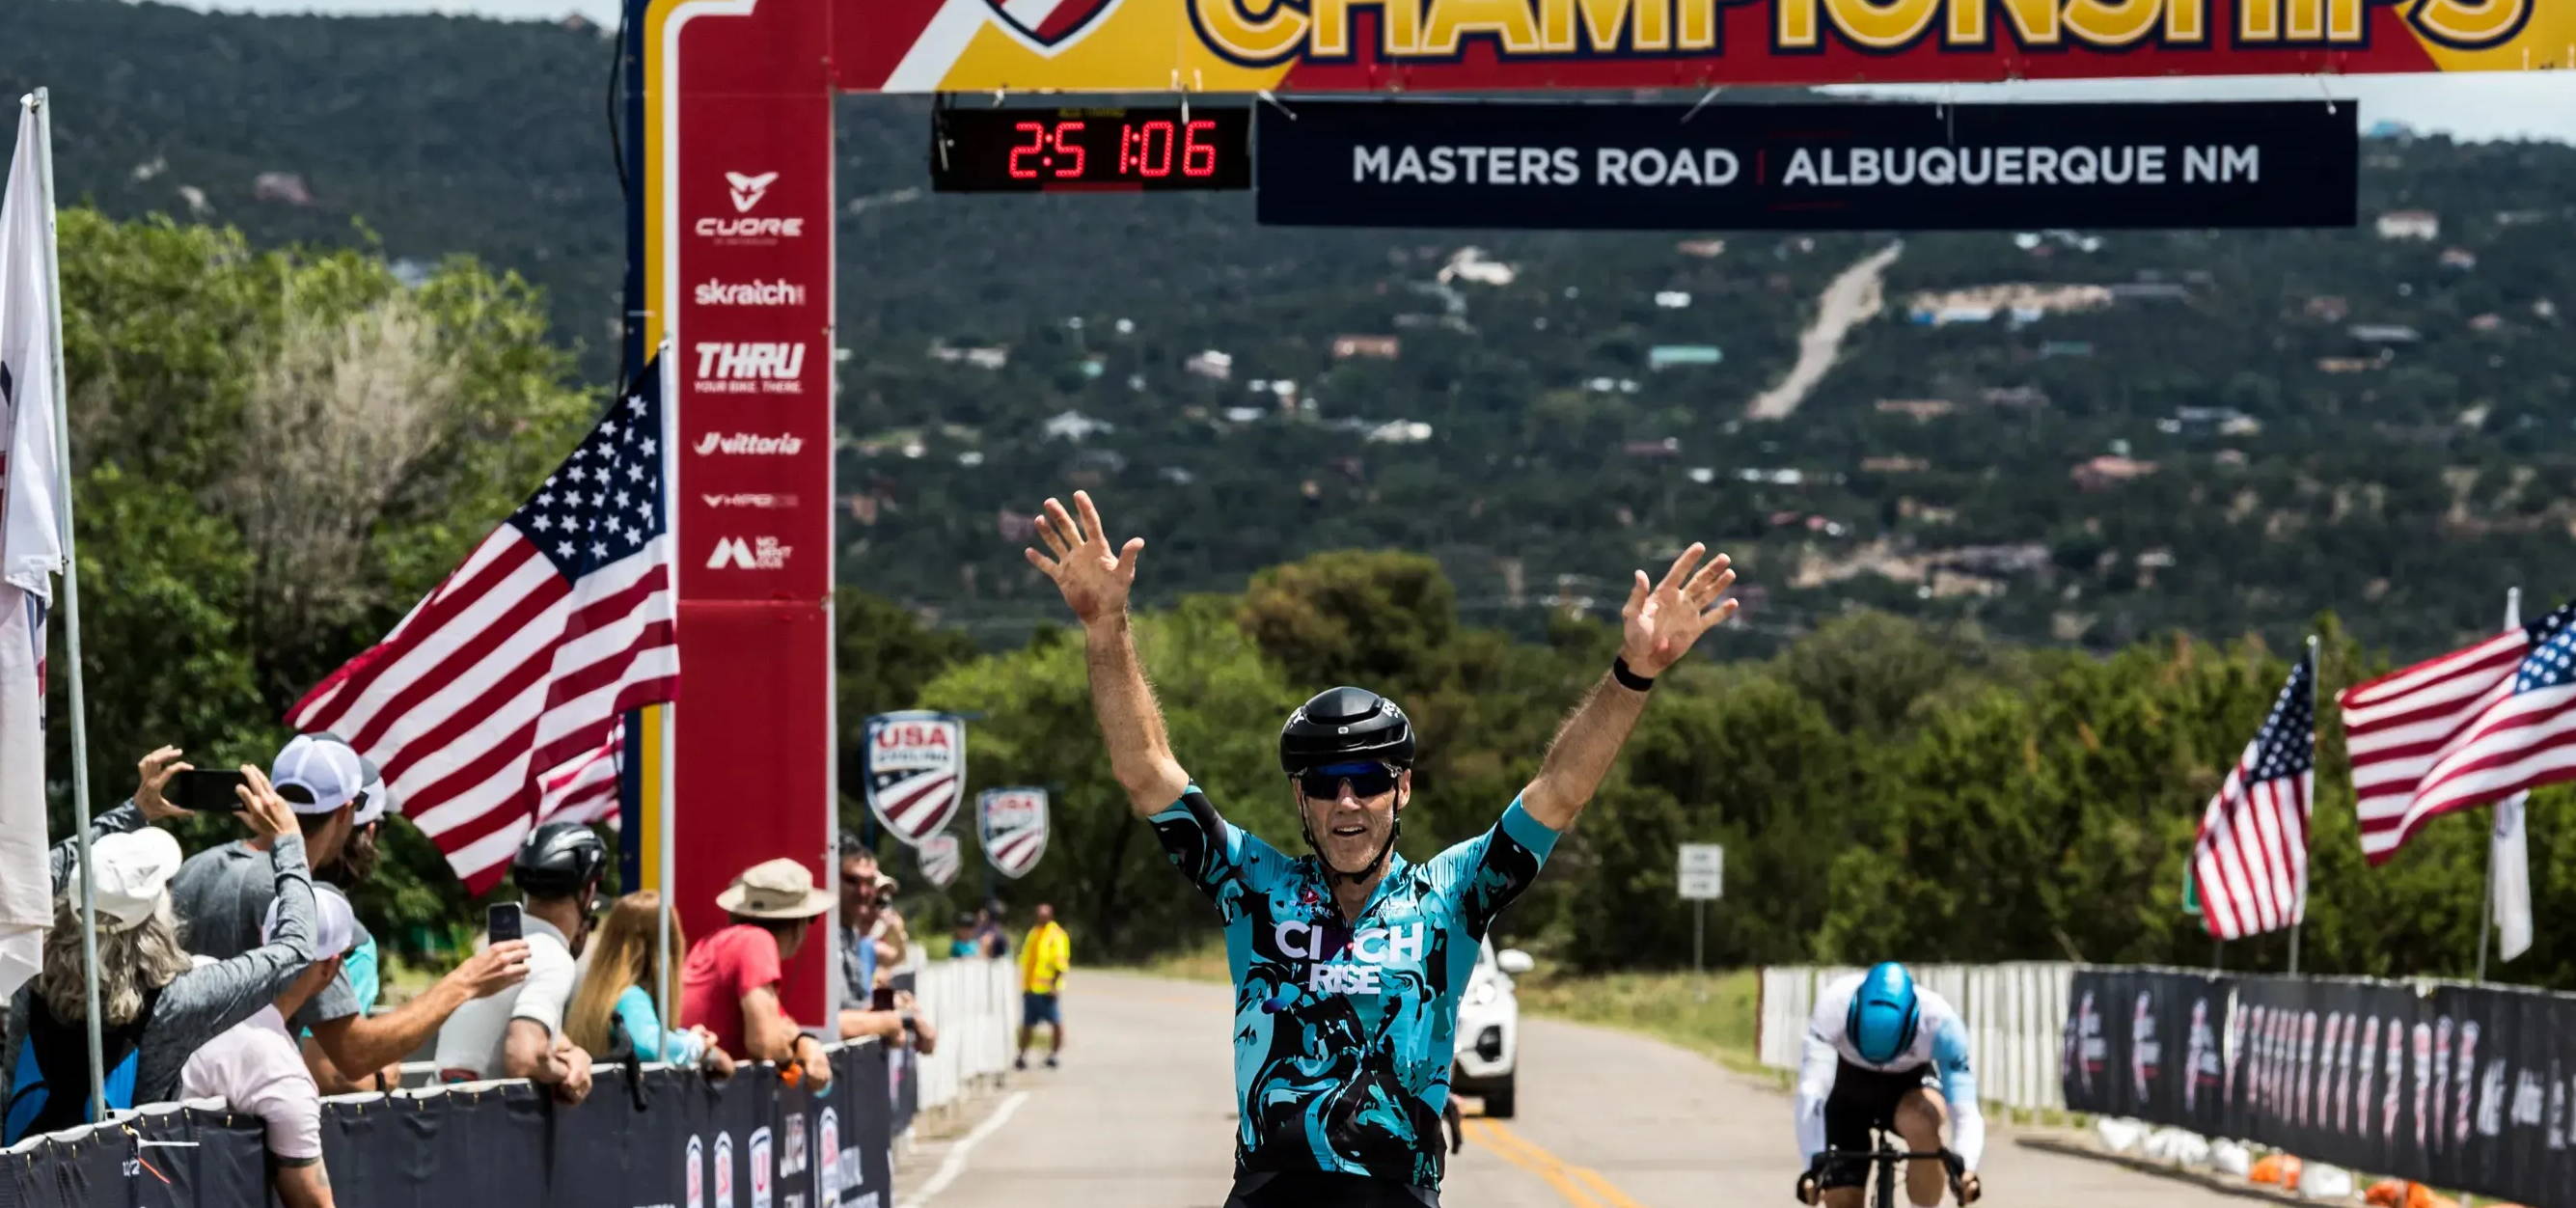 Matt Tanner holds his hands over his head as he wins the masters road national championships in albuquerque new mexico